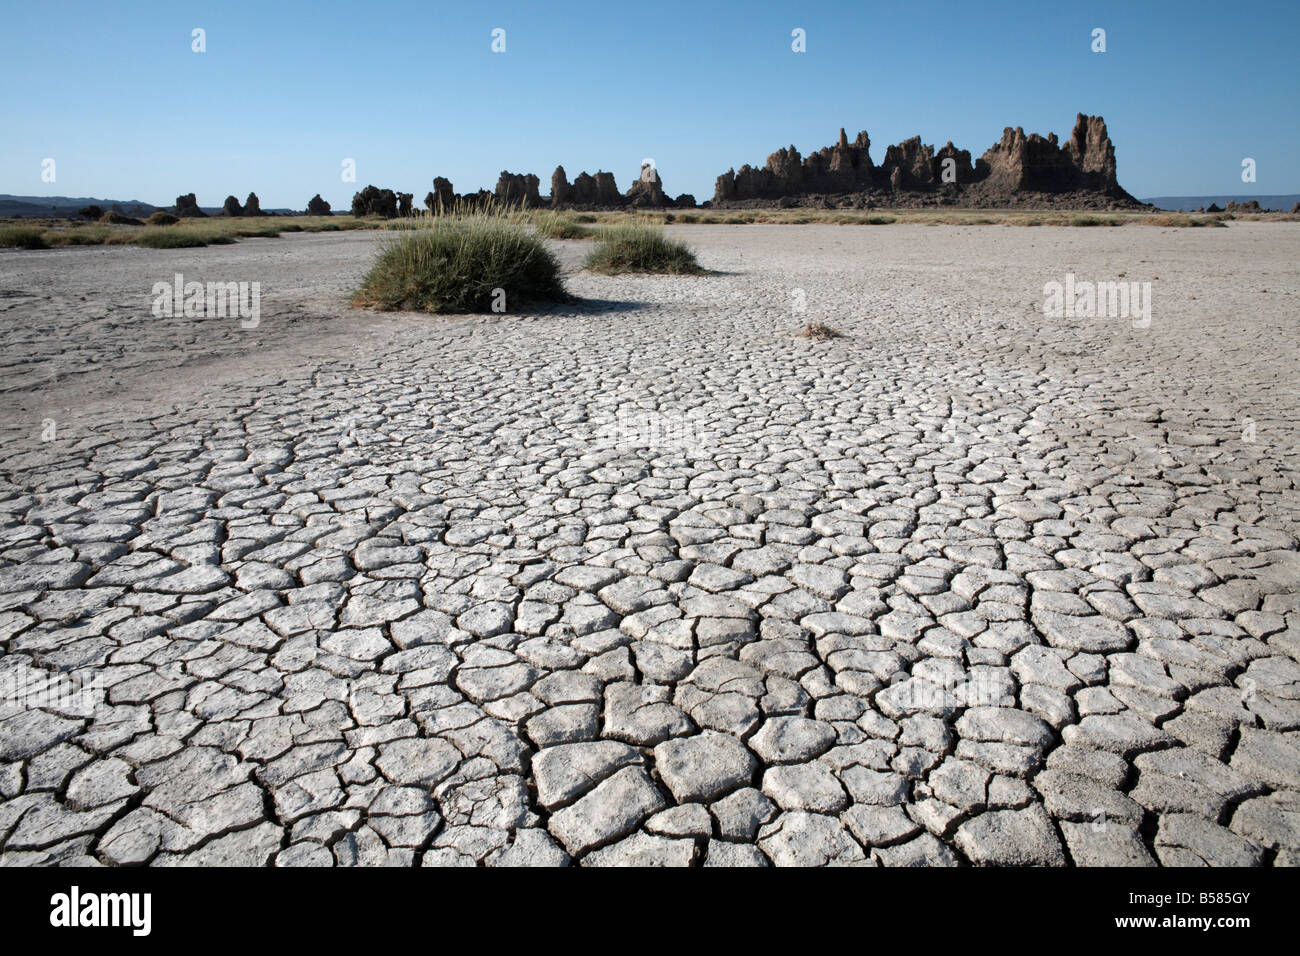 The desolate landscape of Lac Abbe, dotted with limestone chimneys, Djibouti, Africa Stock Photo